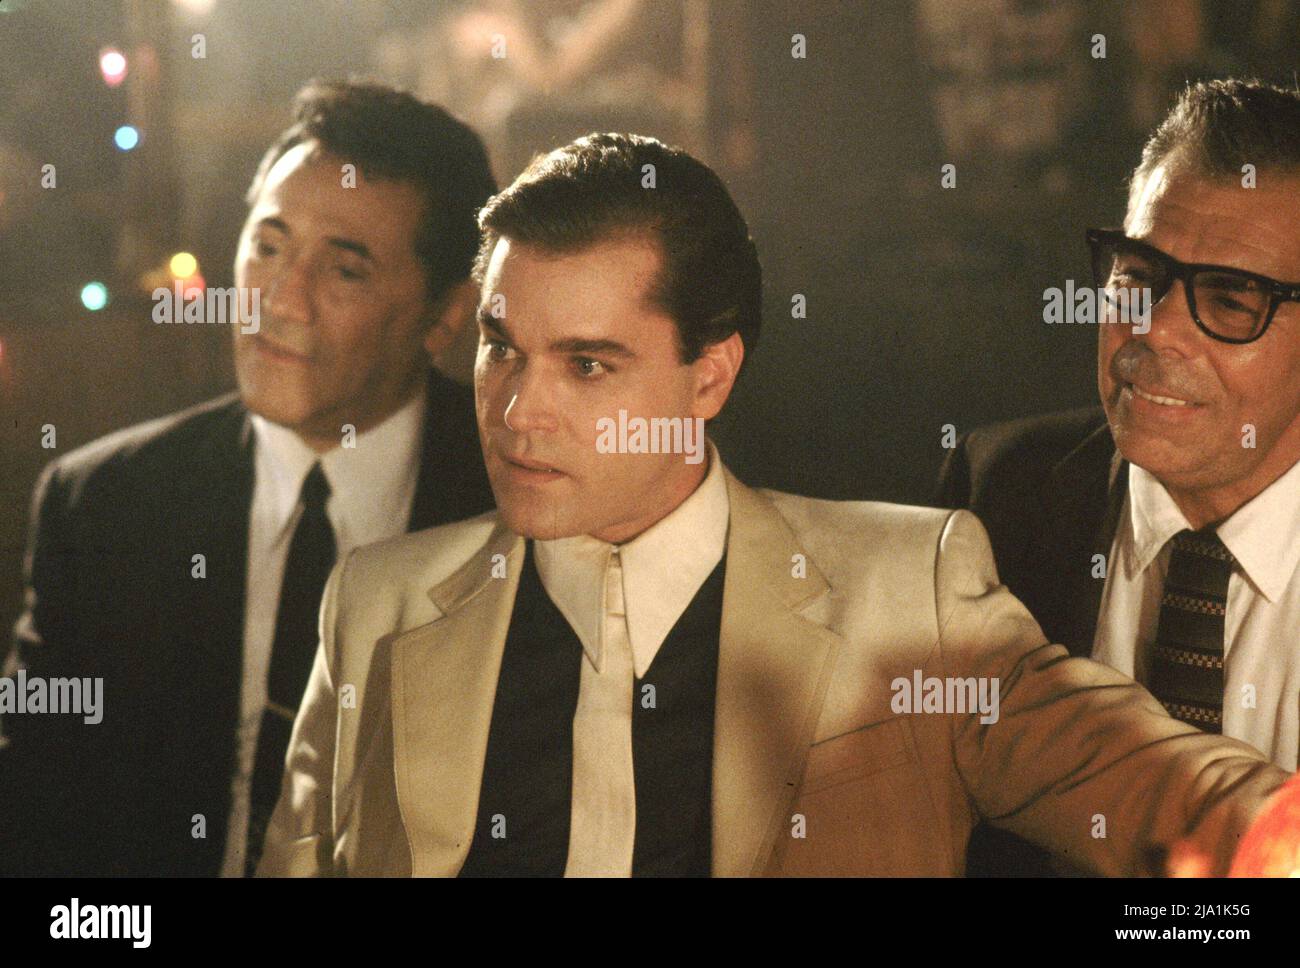 RELEASE DATE: September 19, 1990 MOVIE TITLE: Goodfellas STUDIO: CBS DIRECTOR: Martin Scorsese PLOT: The story of Irish-Italian American, Henry Hill, and how he lives day-to-day life as a member of the Mafia. Based on a true story, the plot revolves around Henry and his two unstable friends Jimmy and Tommy as they gradually climb the ladder from petty crime to violent murders. PICTURED: RAY LIOTTA as Henry Hill. (Credit Image: © Warner Bros. Pictures/Entertainment Pictures) Stock Photo